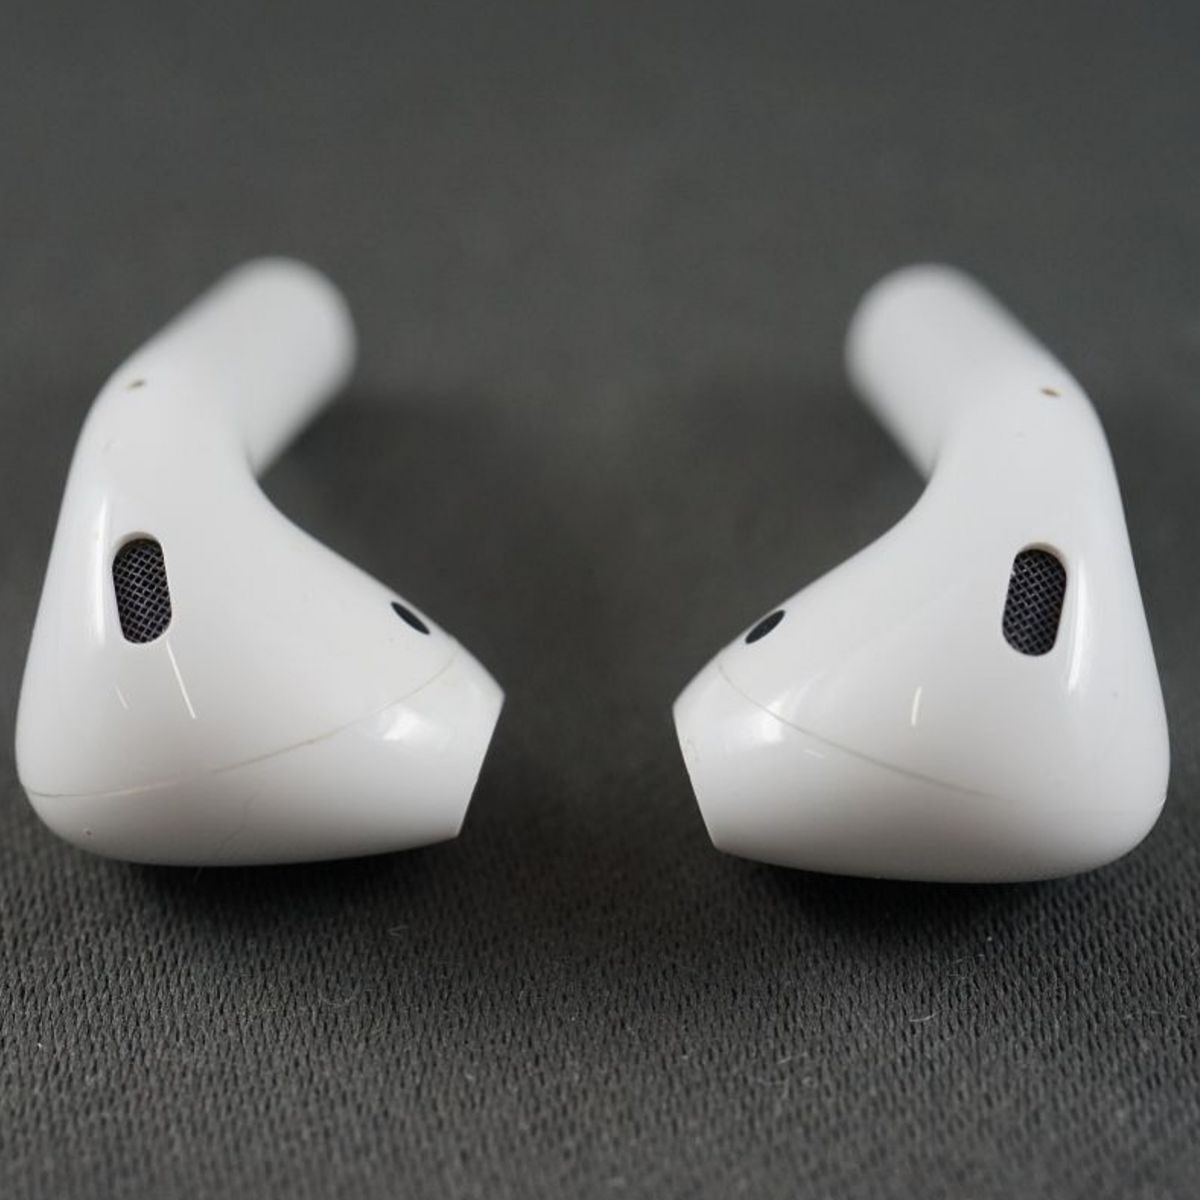 Apple AirPods with Wireless Charging Case エアーポッズ イヤホン USED美品 第二世代 MRXJ2J/A 完動品 中古 V9657_画像6